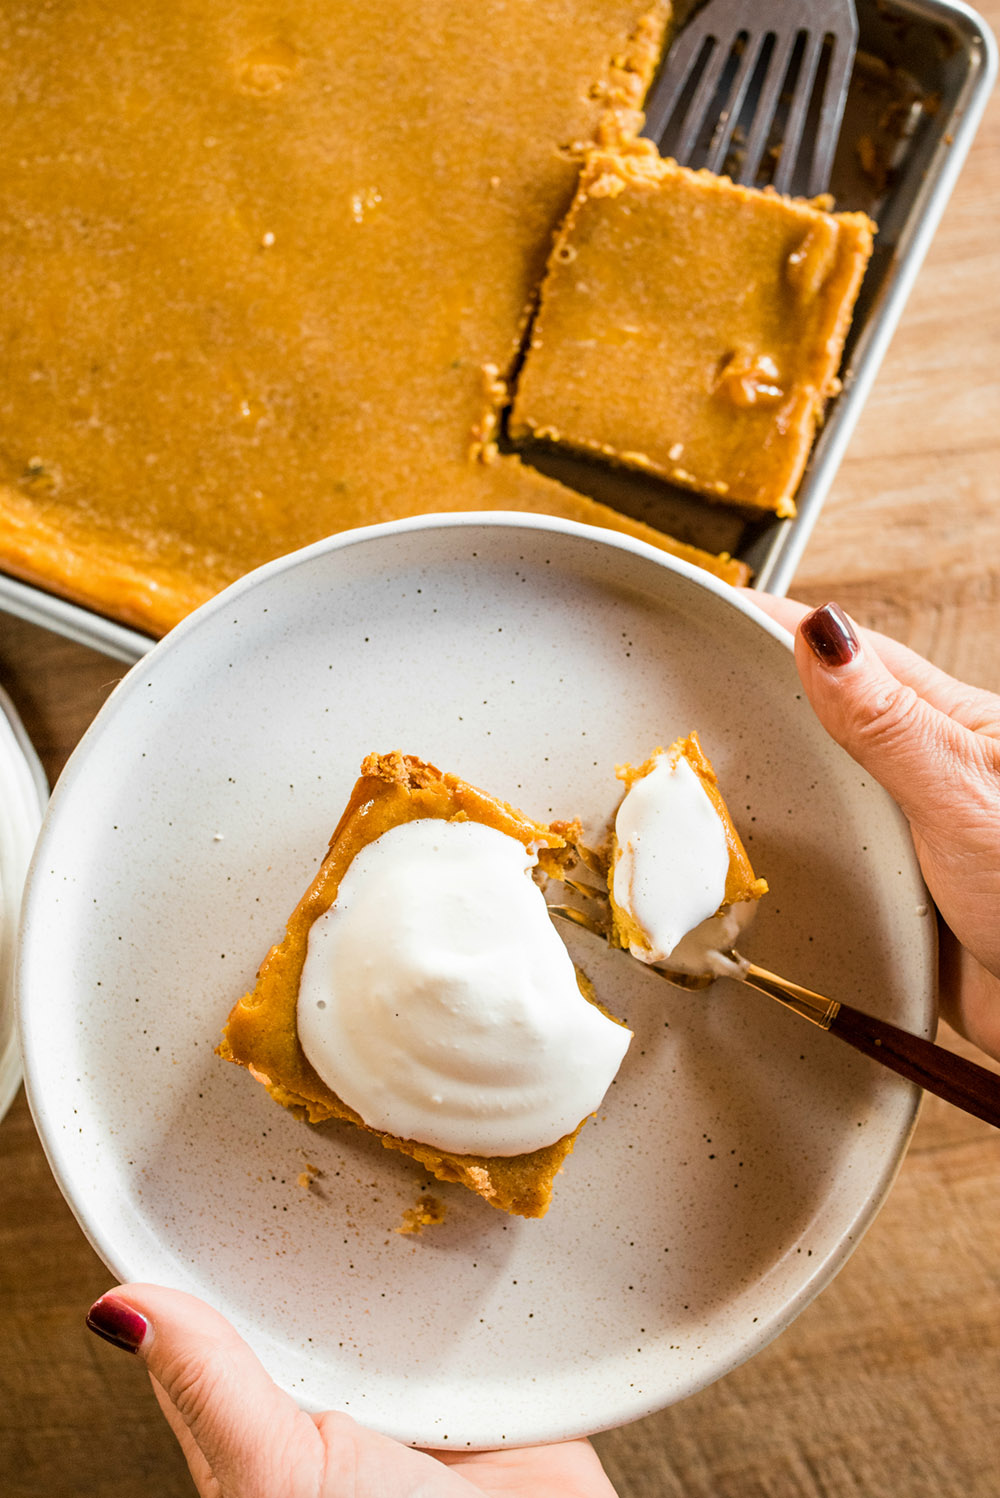 A pumpkin pie square on a plate.